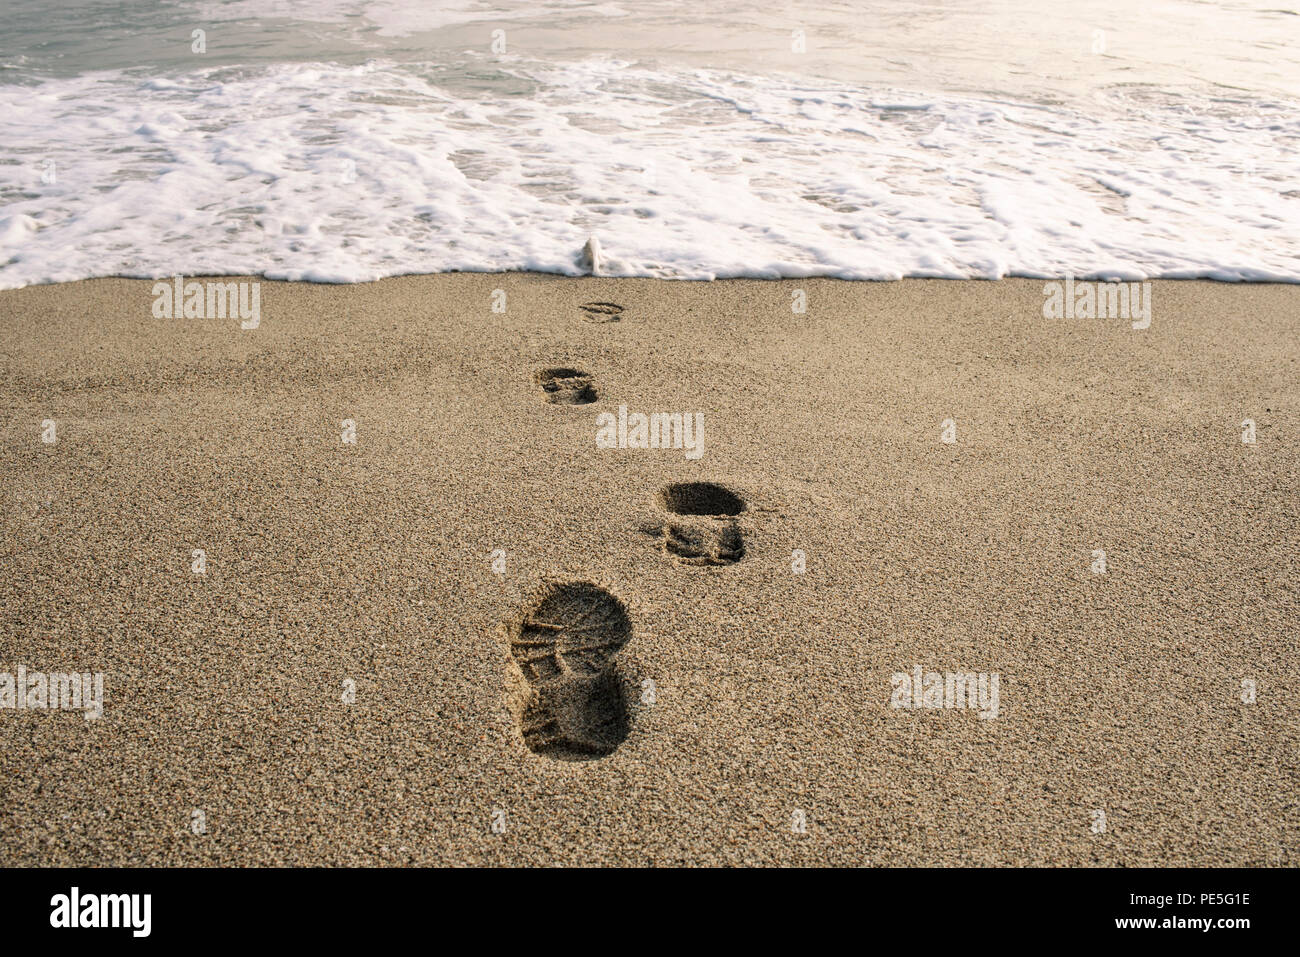 Swallowed in the sea. Shoe footprints in sand. Expressive conceptual imagery. Punta Hermosa, Lima District, Peru. Jul 2018 Stock Photo